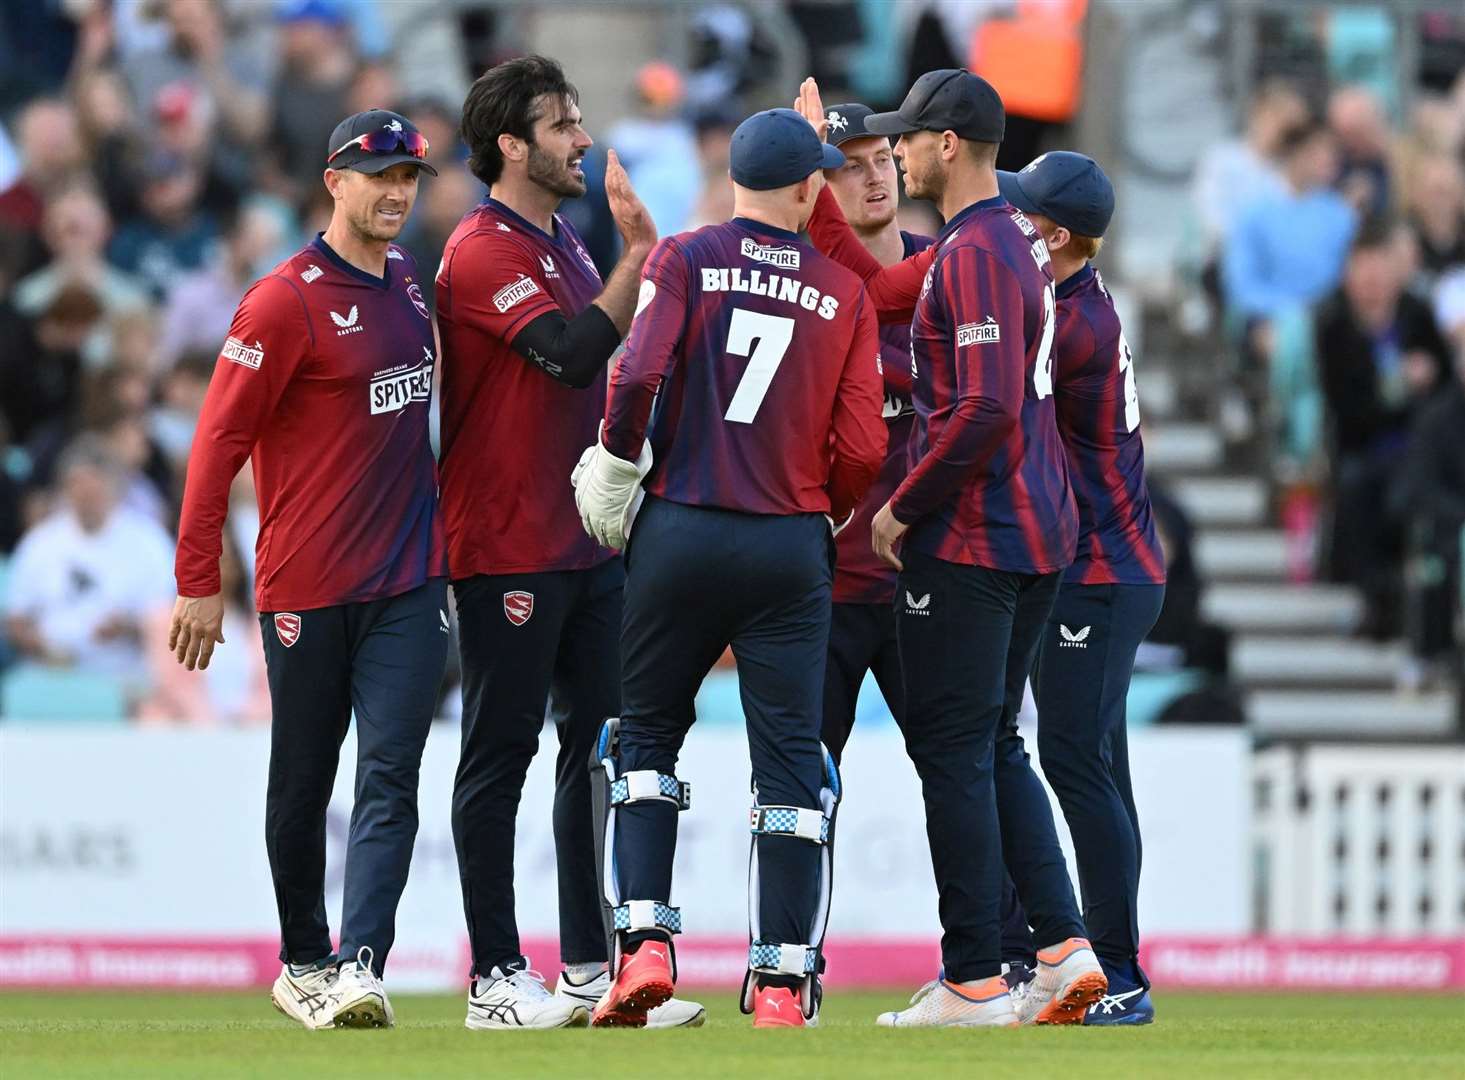 Kent celebrate the wicket of Sam Curran. Picture: Keith Gillard